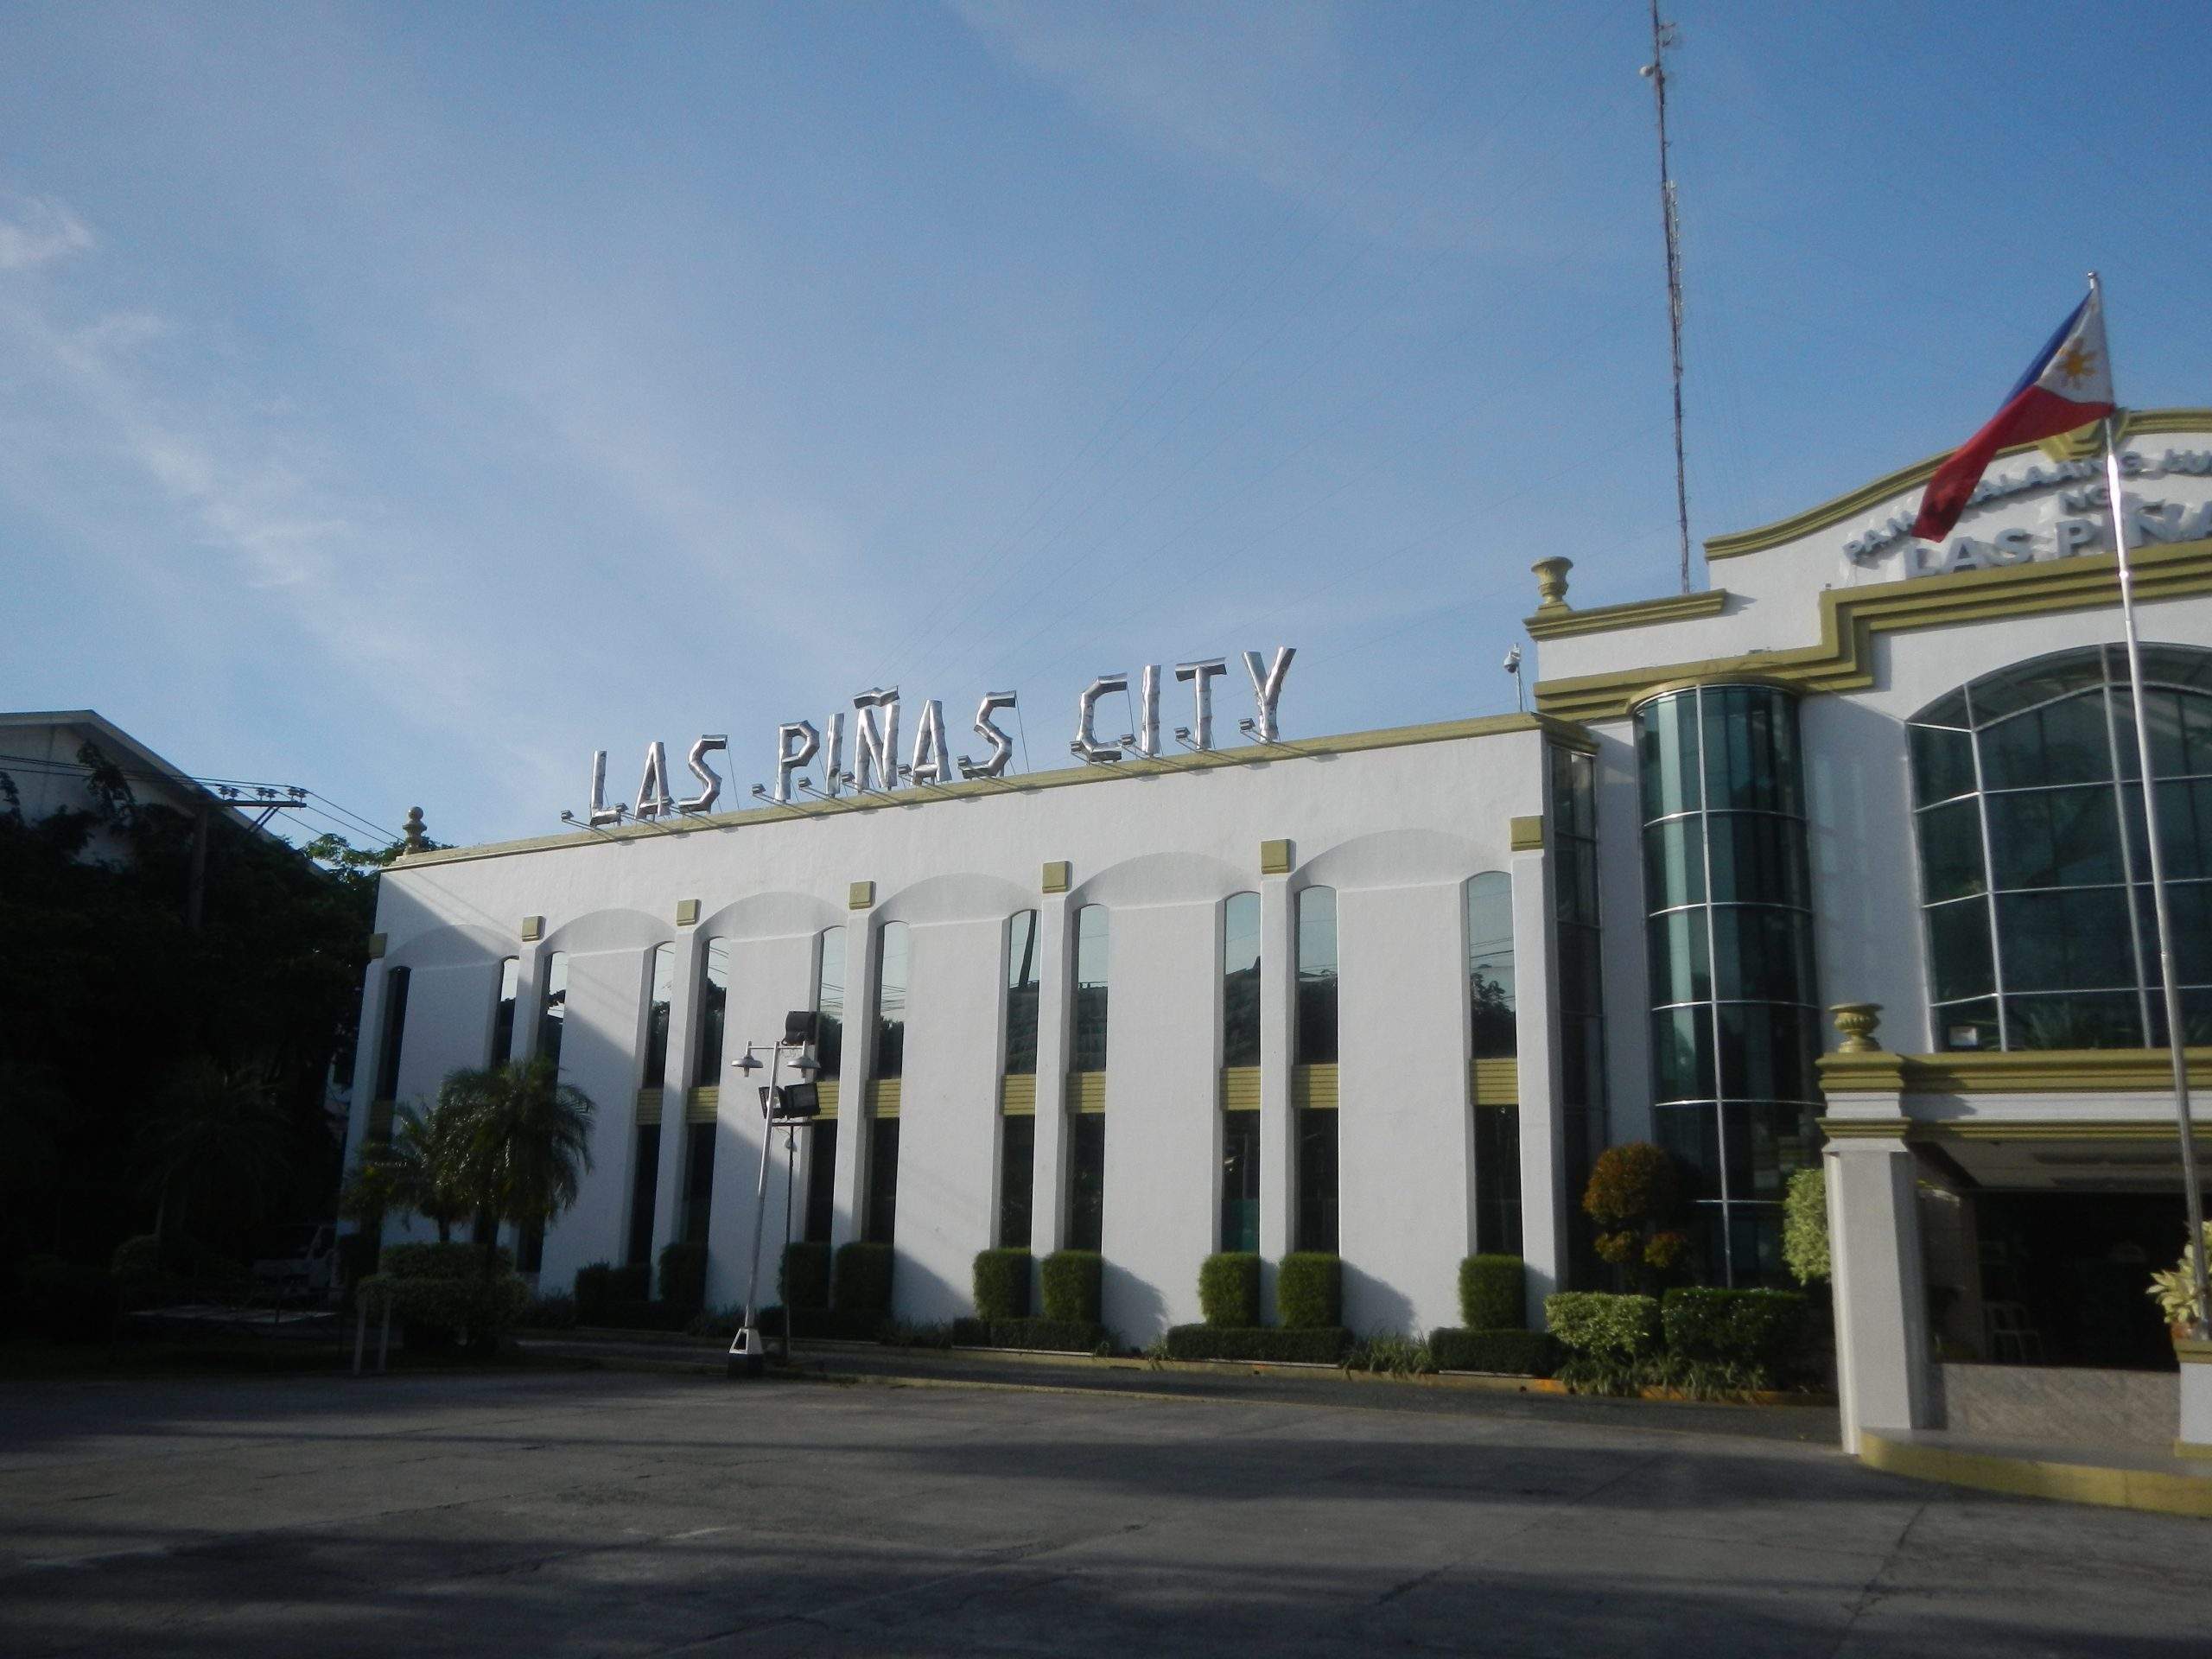 Las Pinas City: The Perfect Destination for Culture, History, and Adventure Seekers